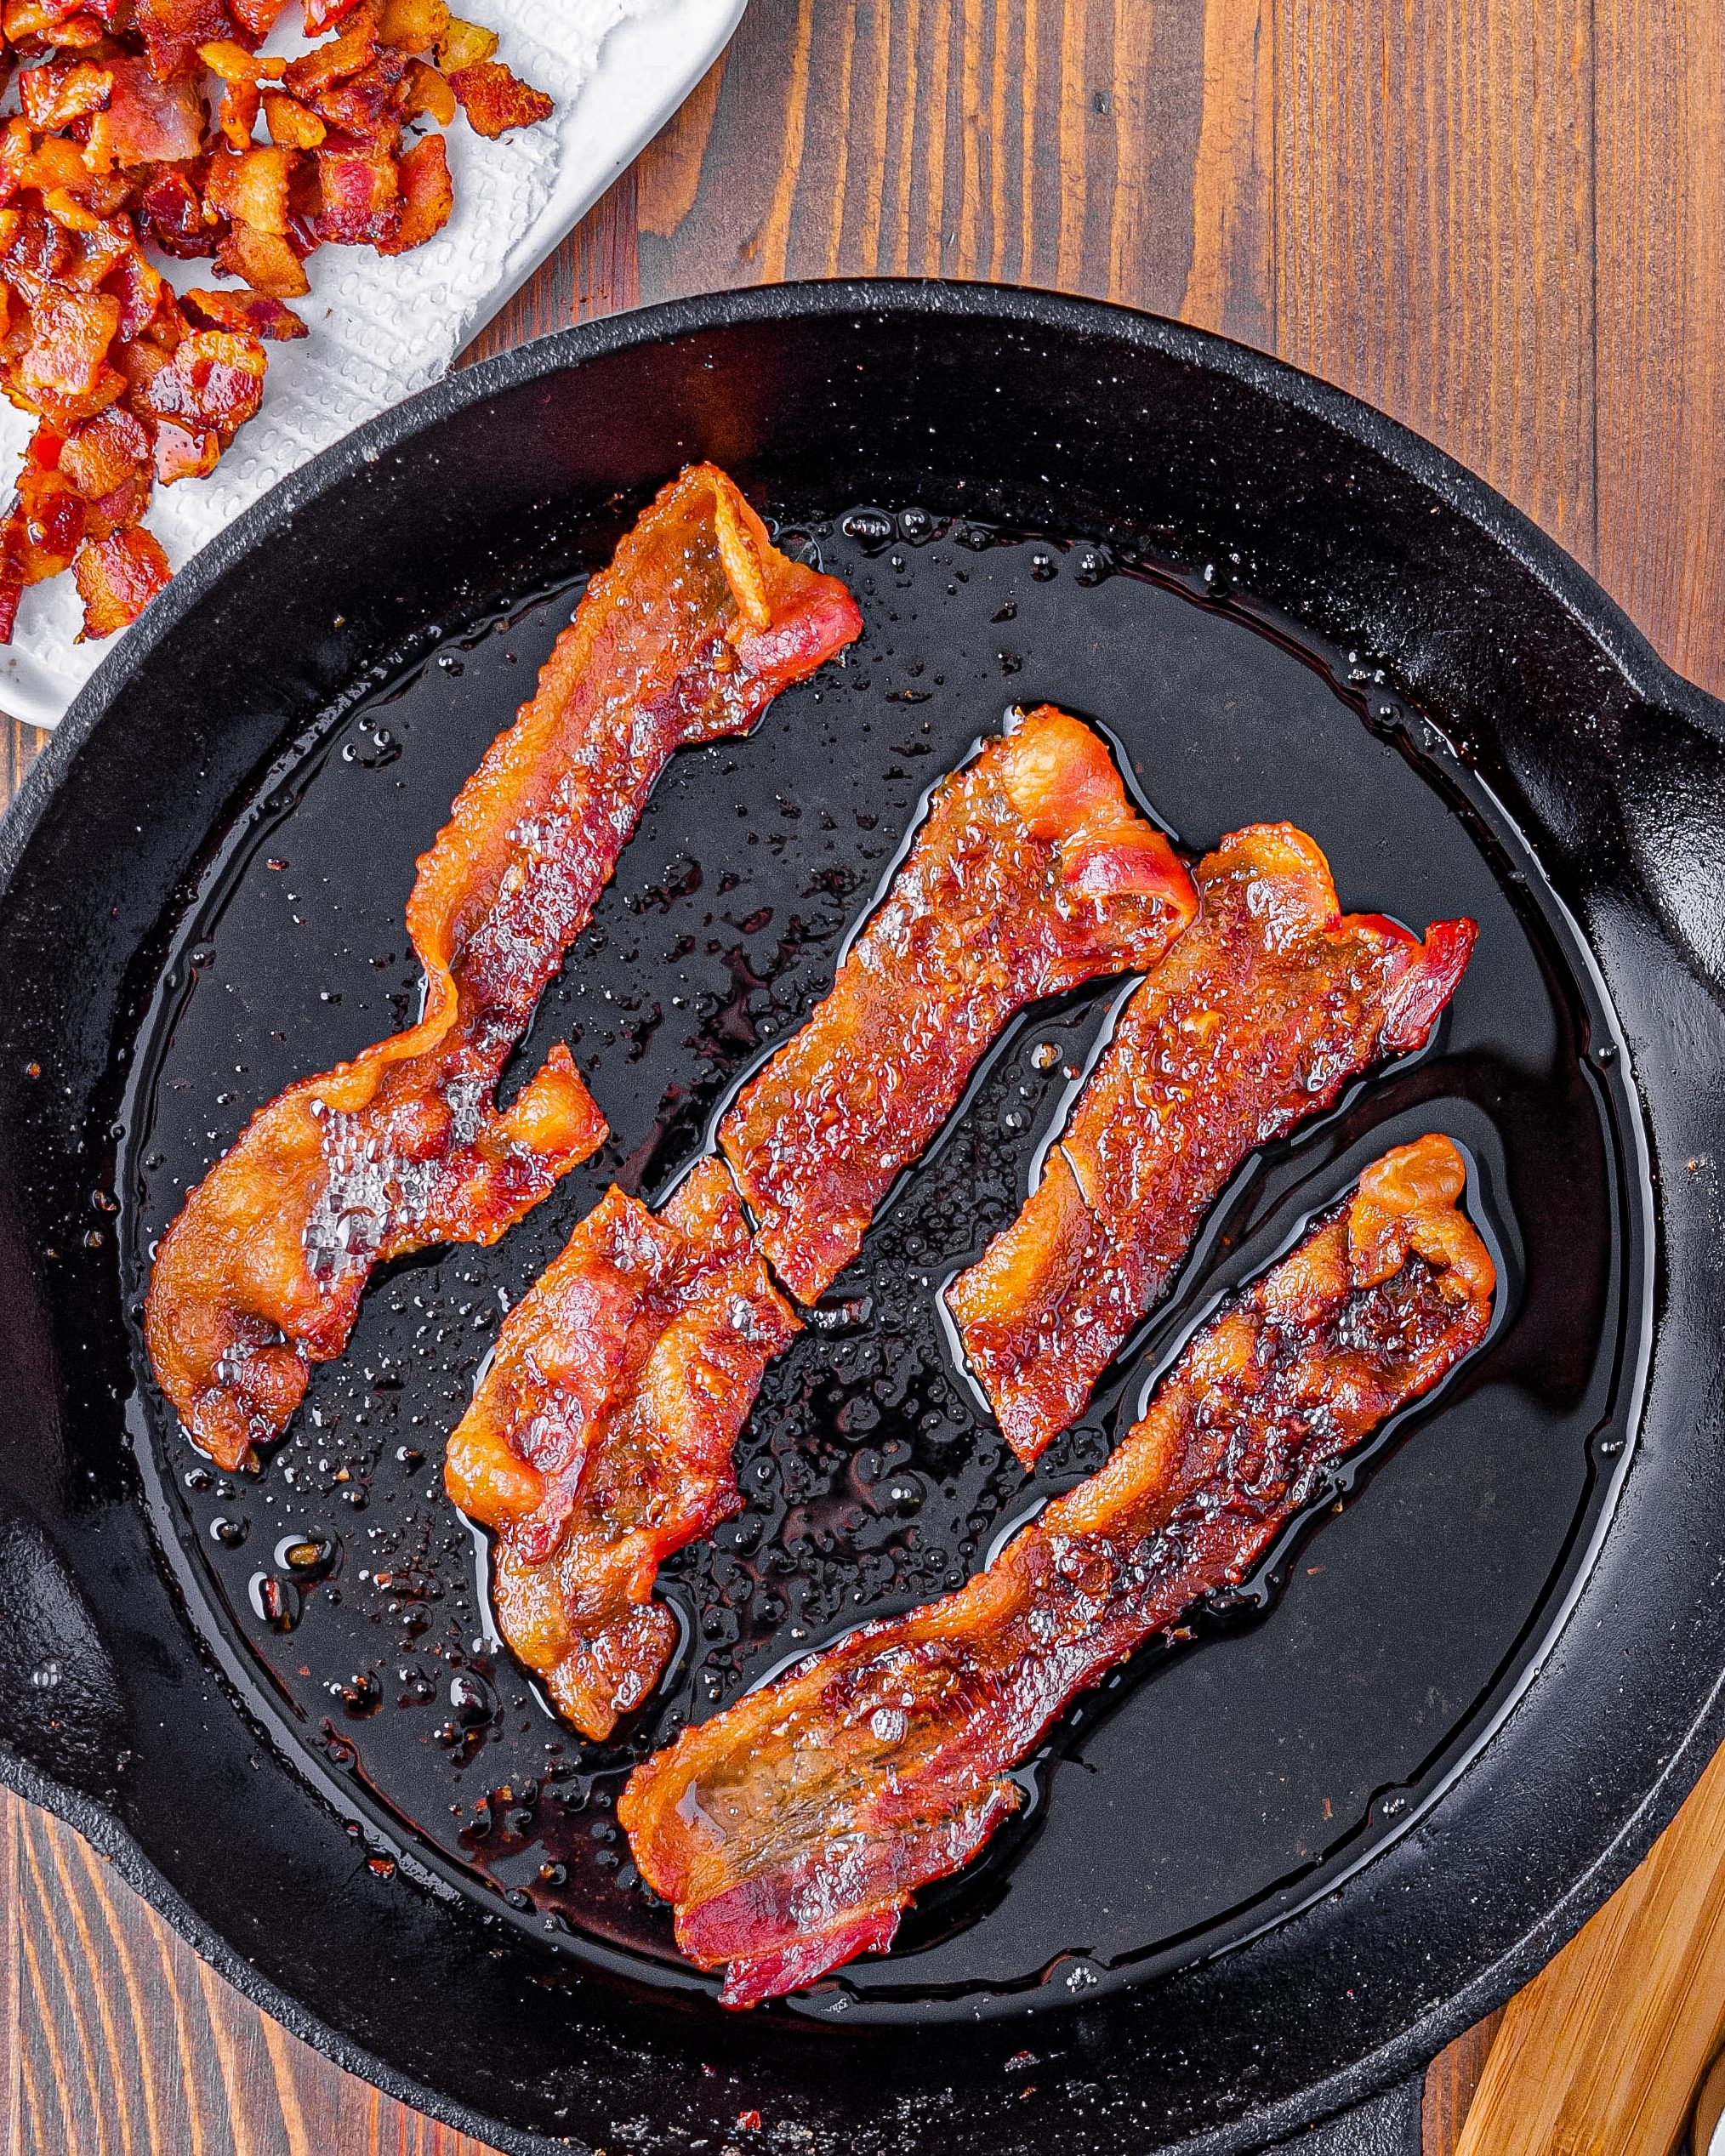 Cook the bacon and set it aside to cool. Reserve the bacon grease.